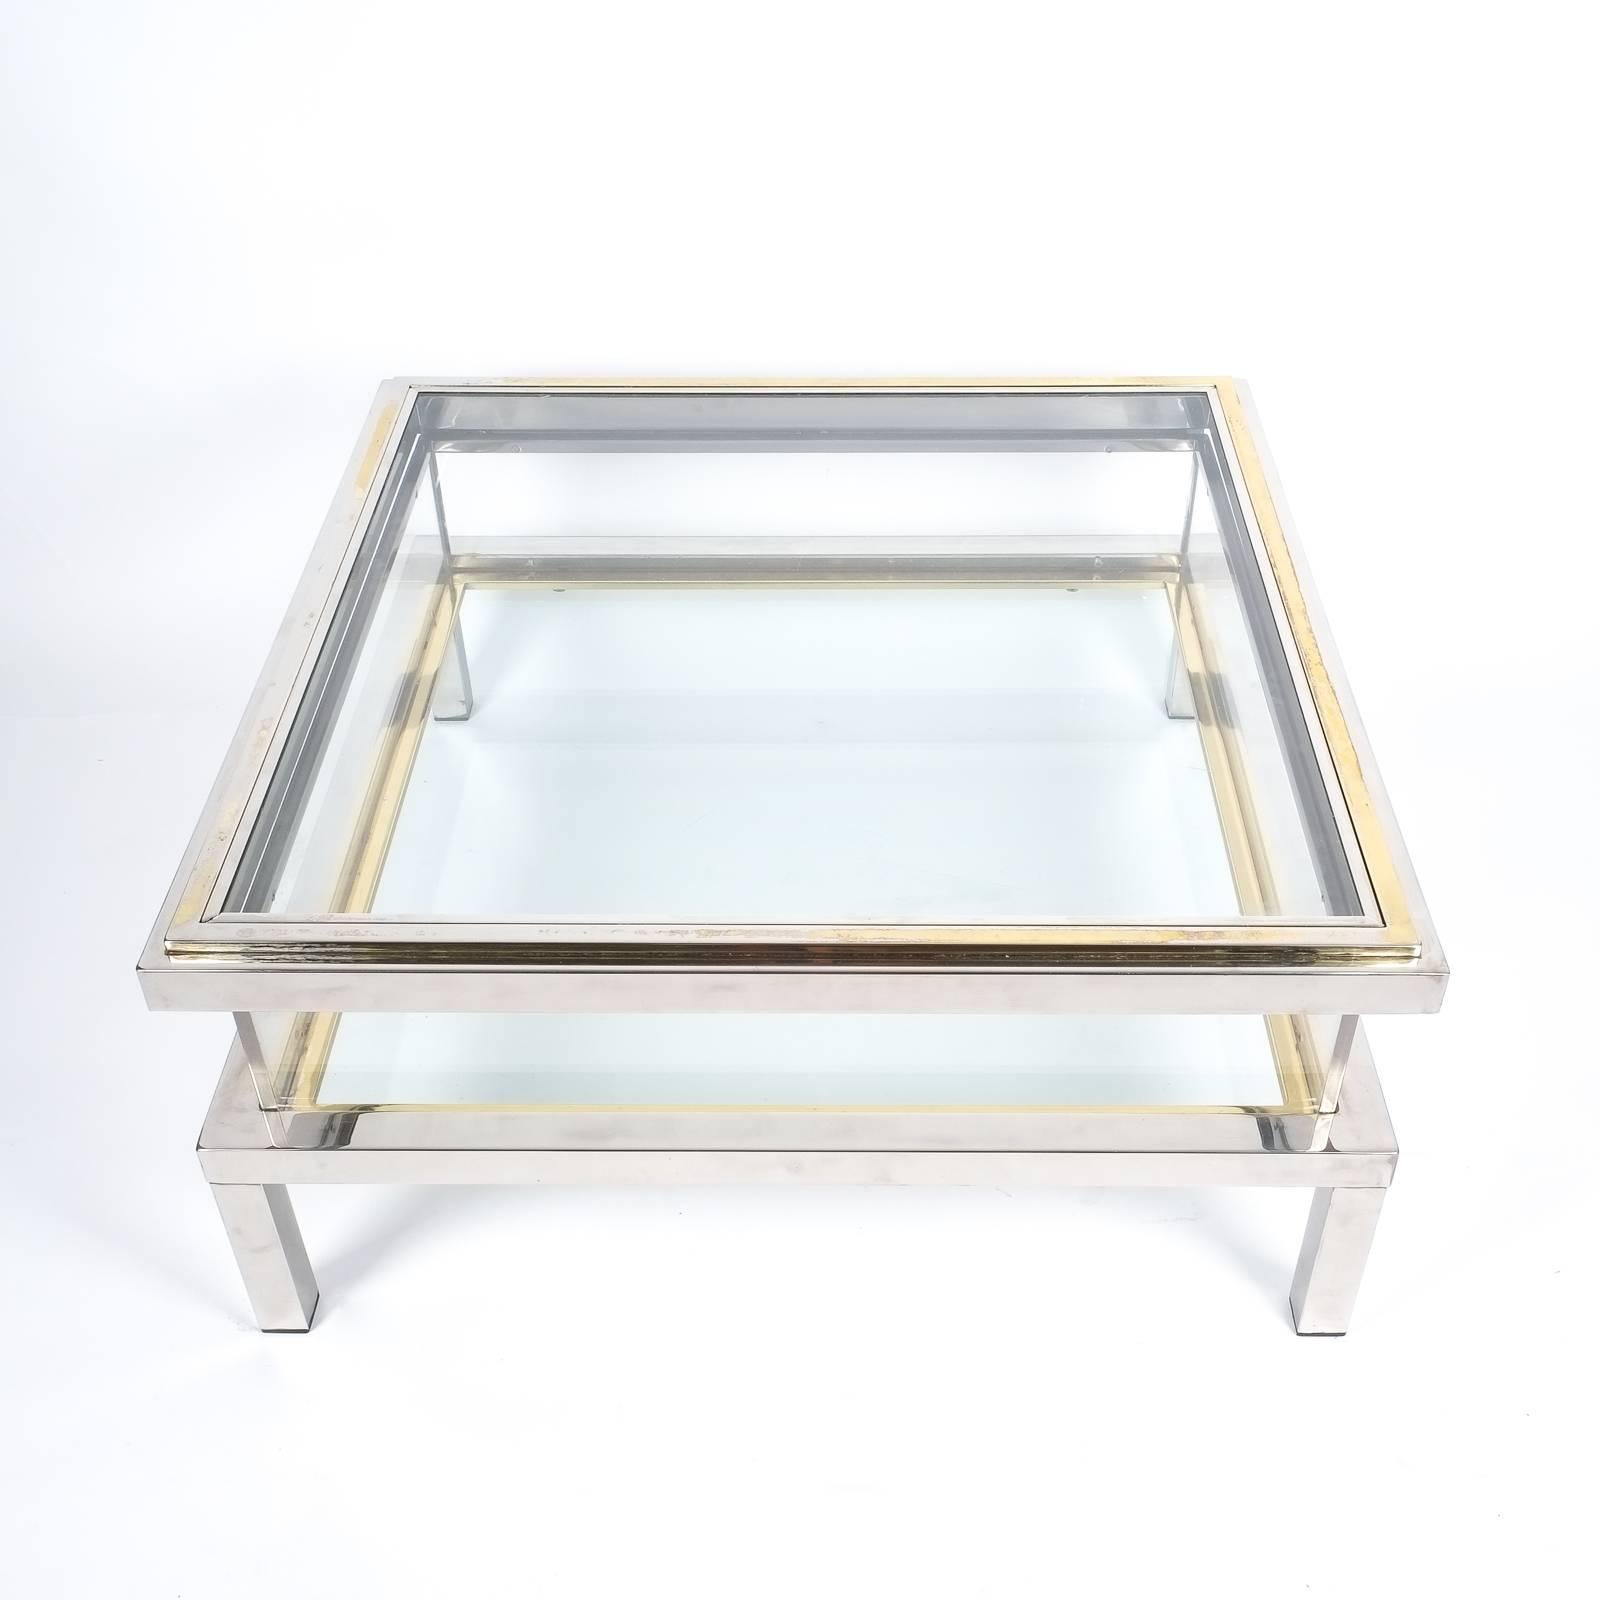 Very elegant 1970s French chrome and glass table with brass accents to the glass top. Very solid quality 35 inch table with a sliding glass top to access the interior display case, ideal for presenting books or decorative items. It's in very good